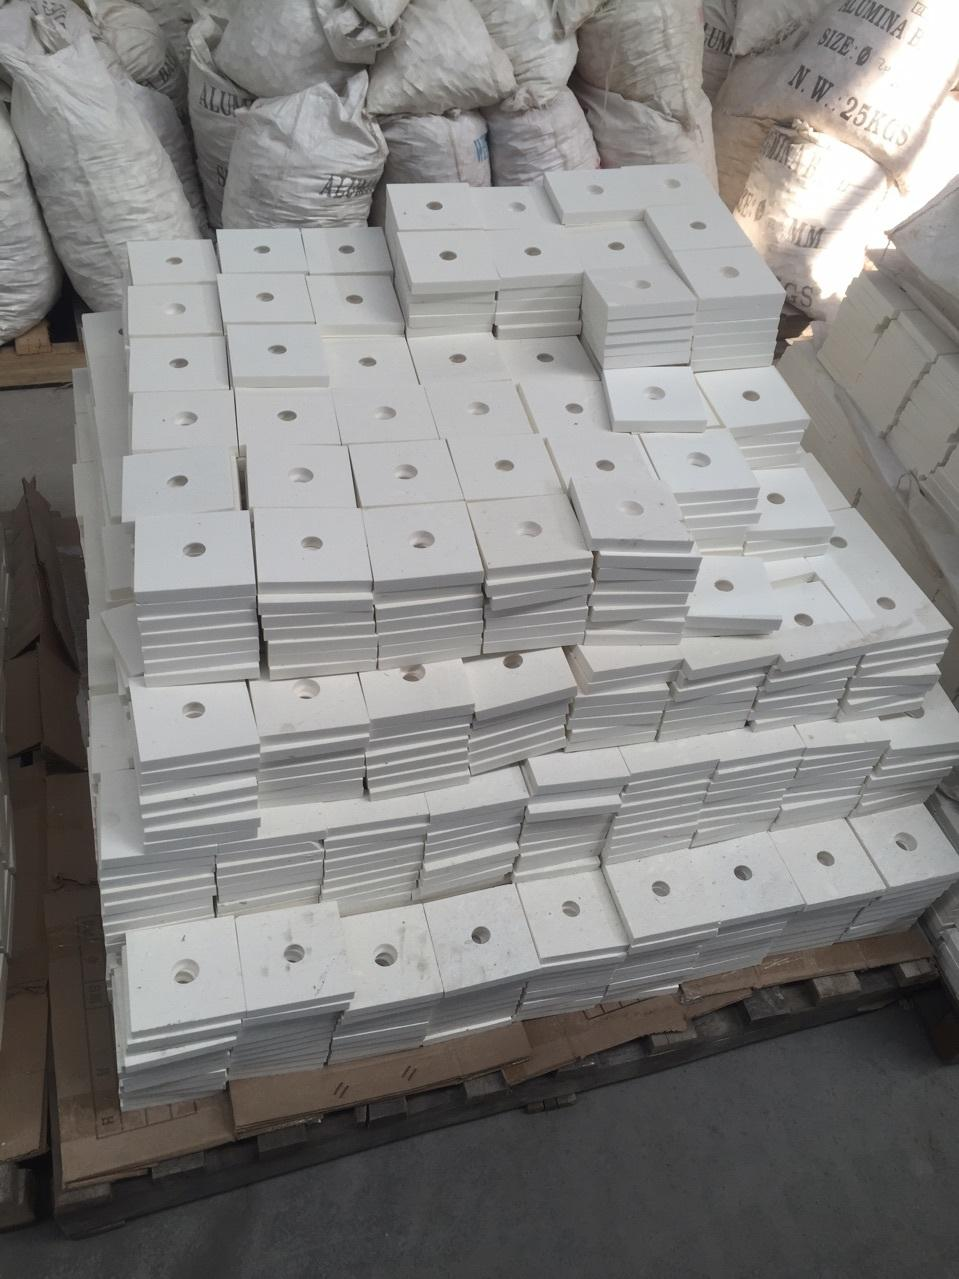 Leading Manufacturer for Sic Body Armor Plates For Safety Gear -
 Alumina ceramic tiles – ZhongPeng